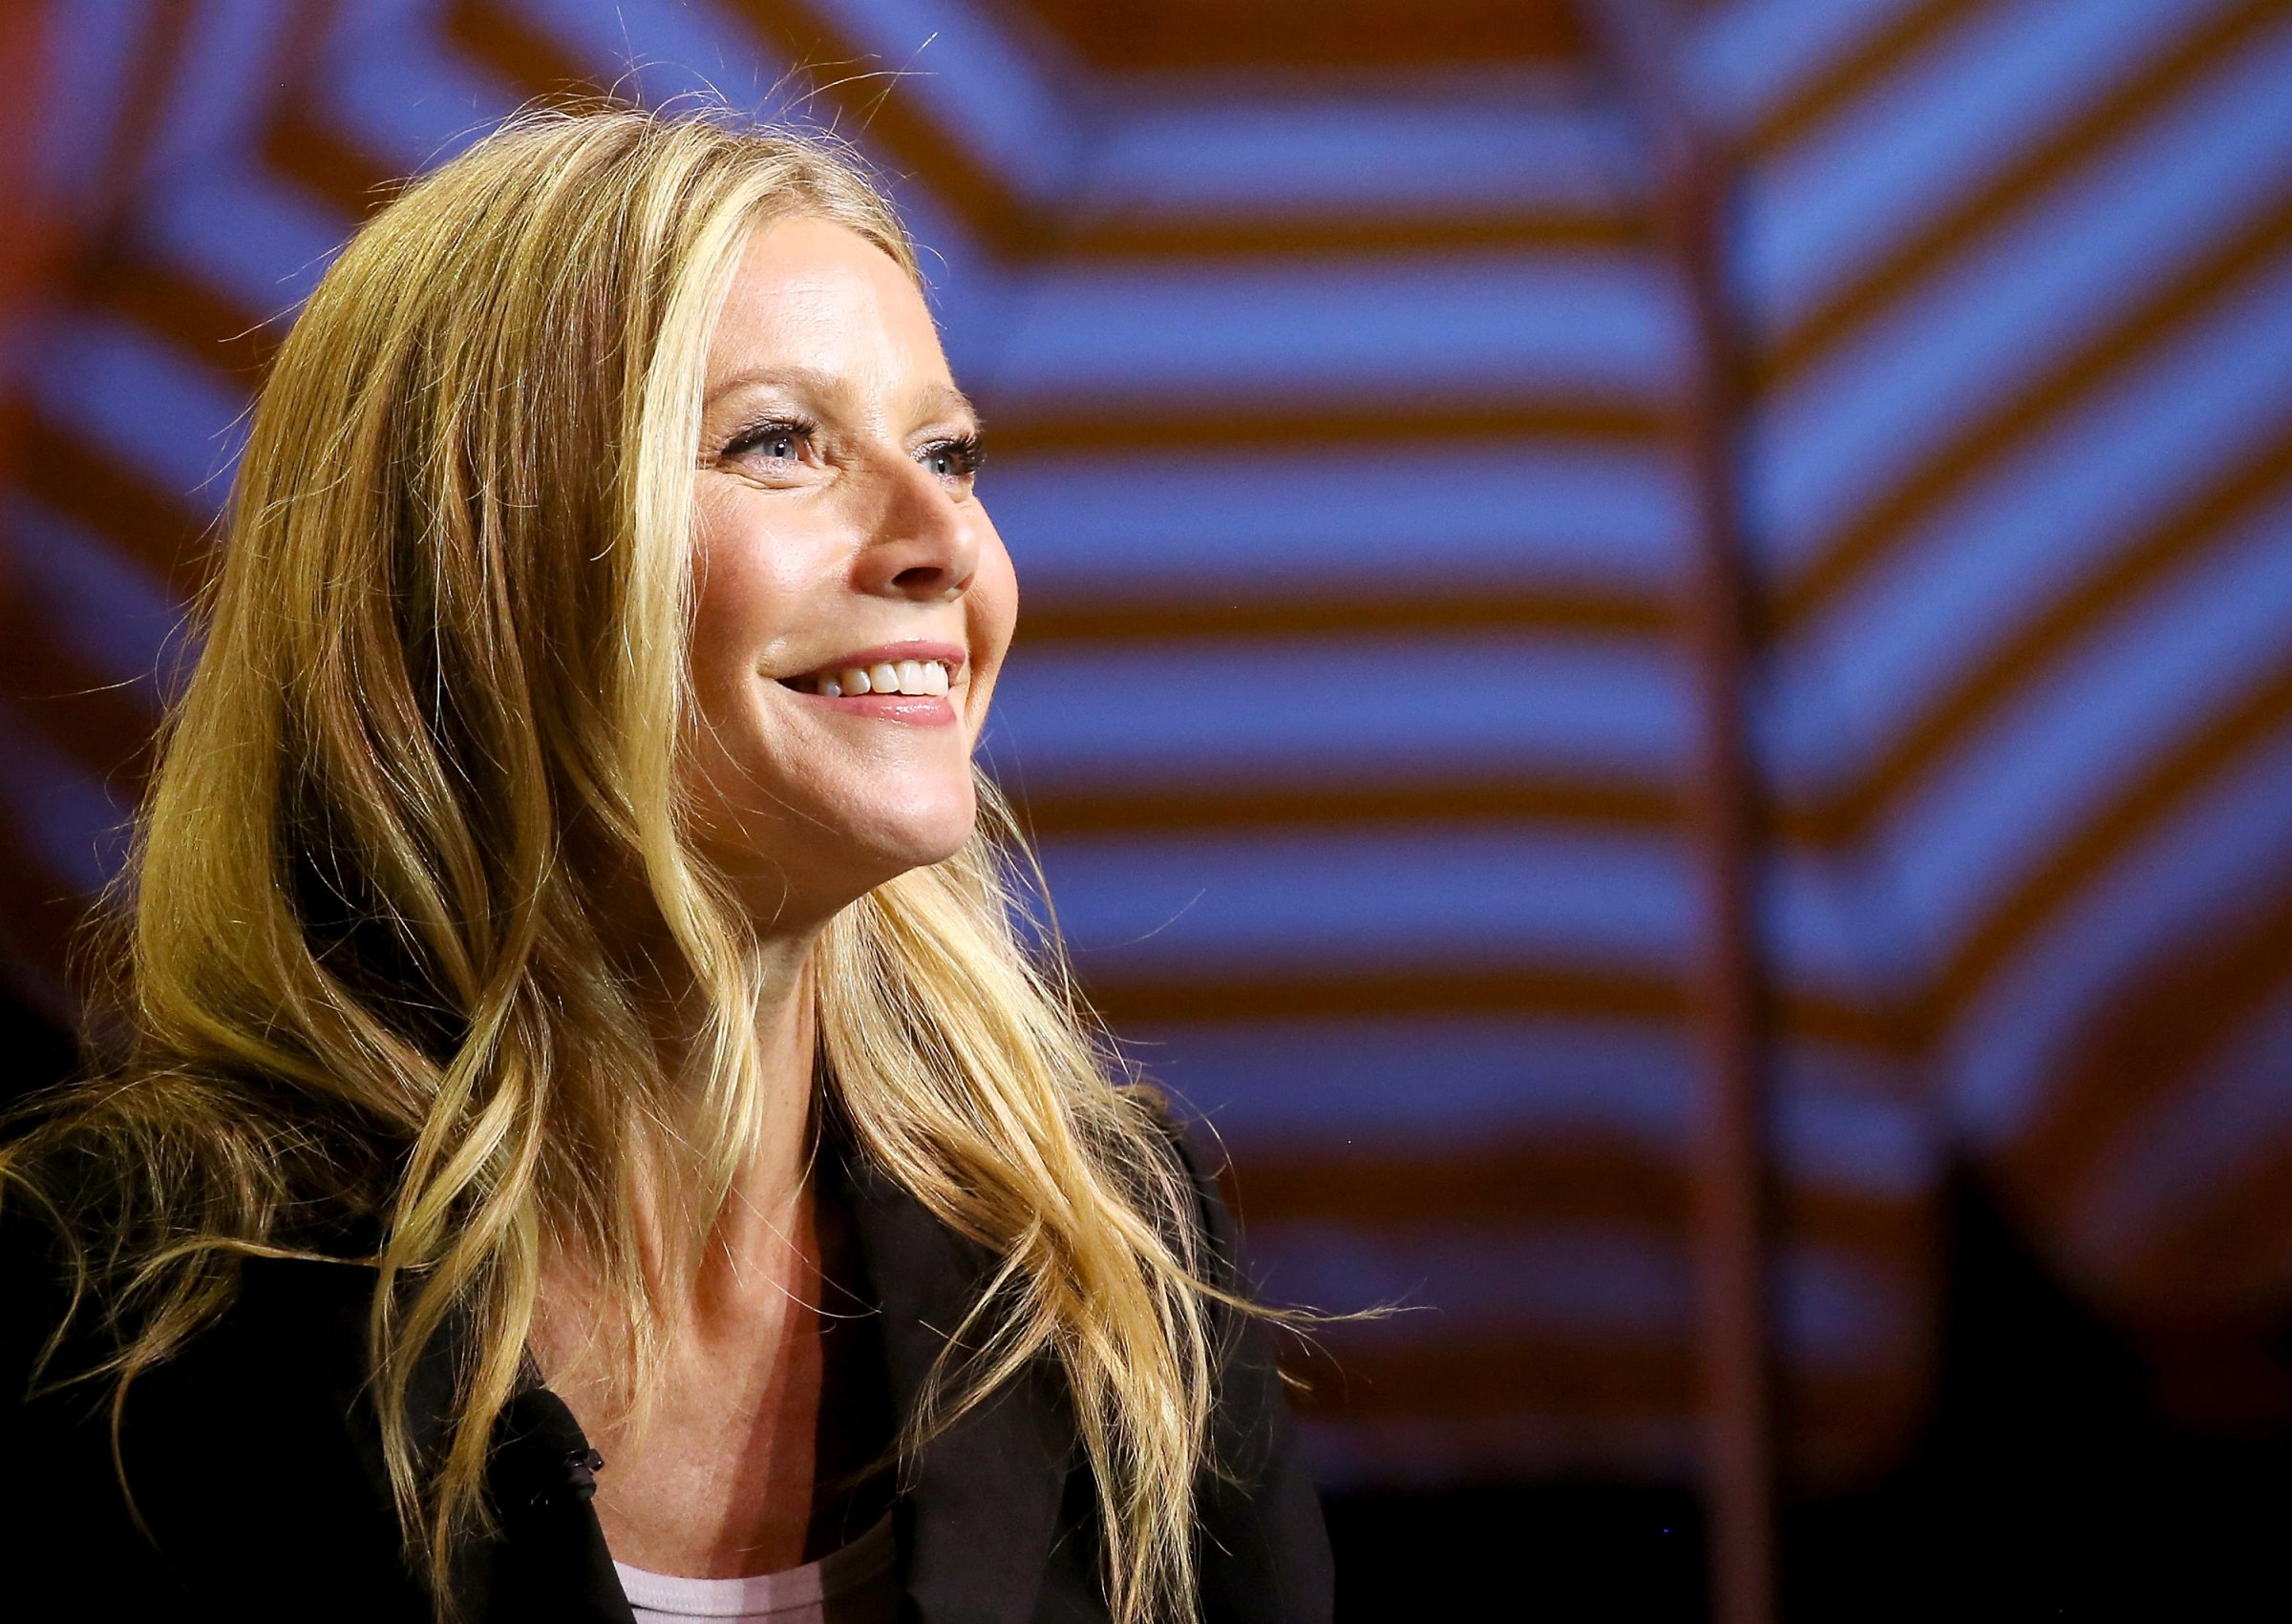 Gwyneth Paltrow speaks onstage during the 3rd Annual Airbnb Open Spotlight held at The Los Angeles Theater on November 19, 2016 in Los Angeles, California.